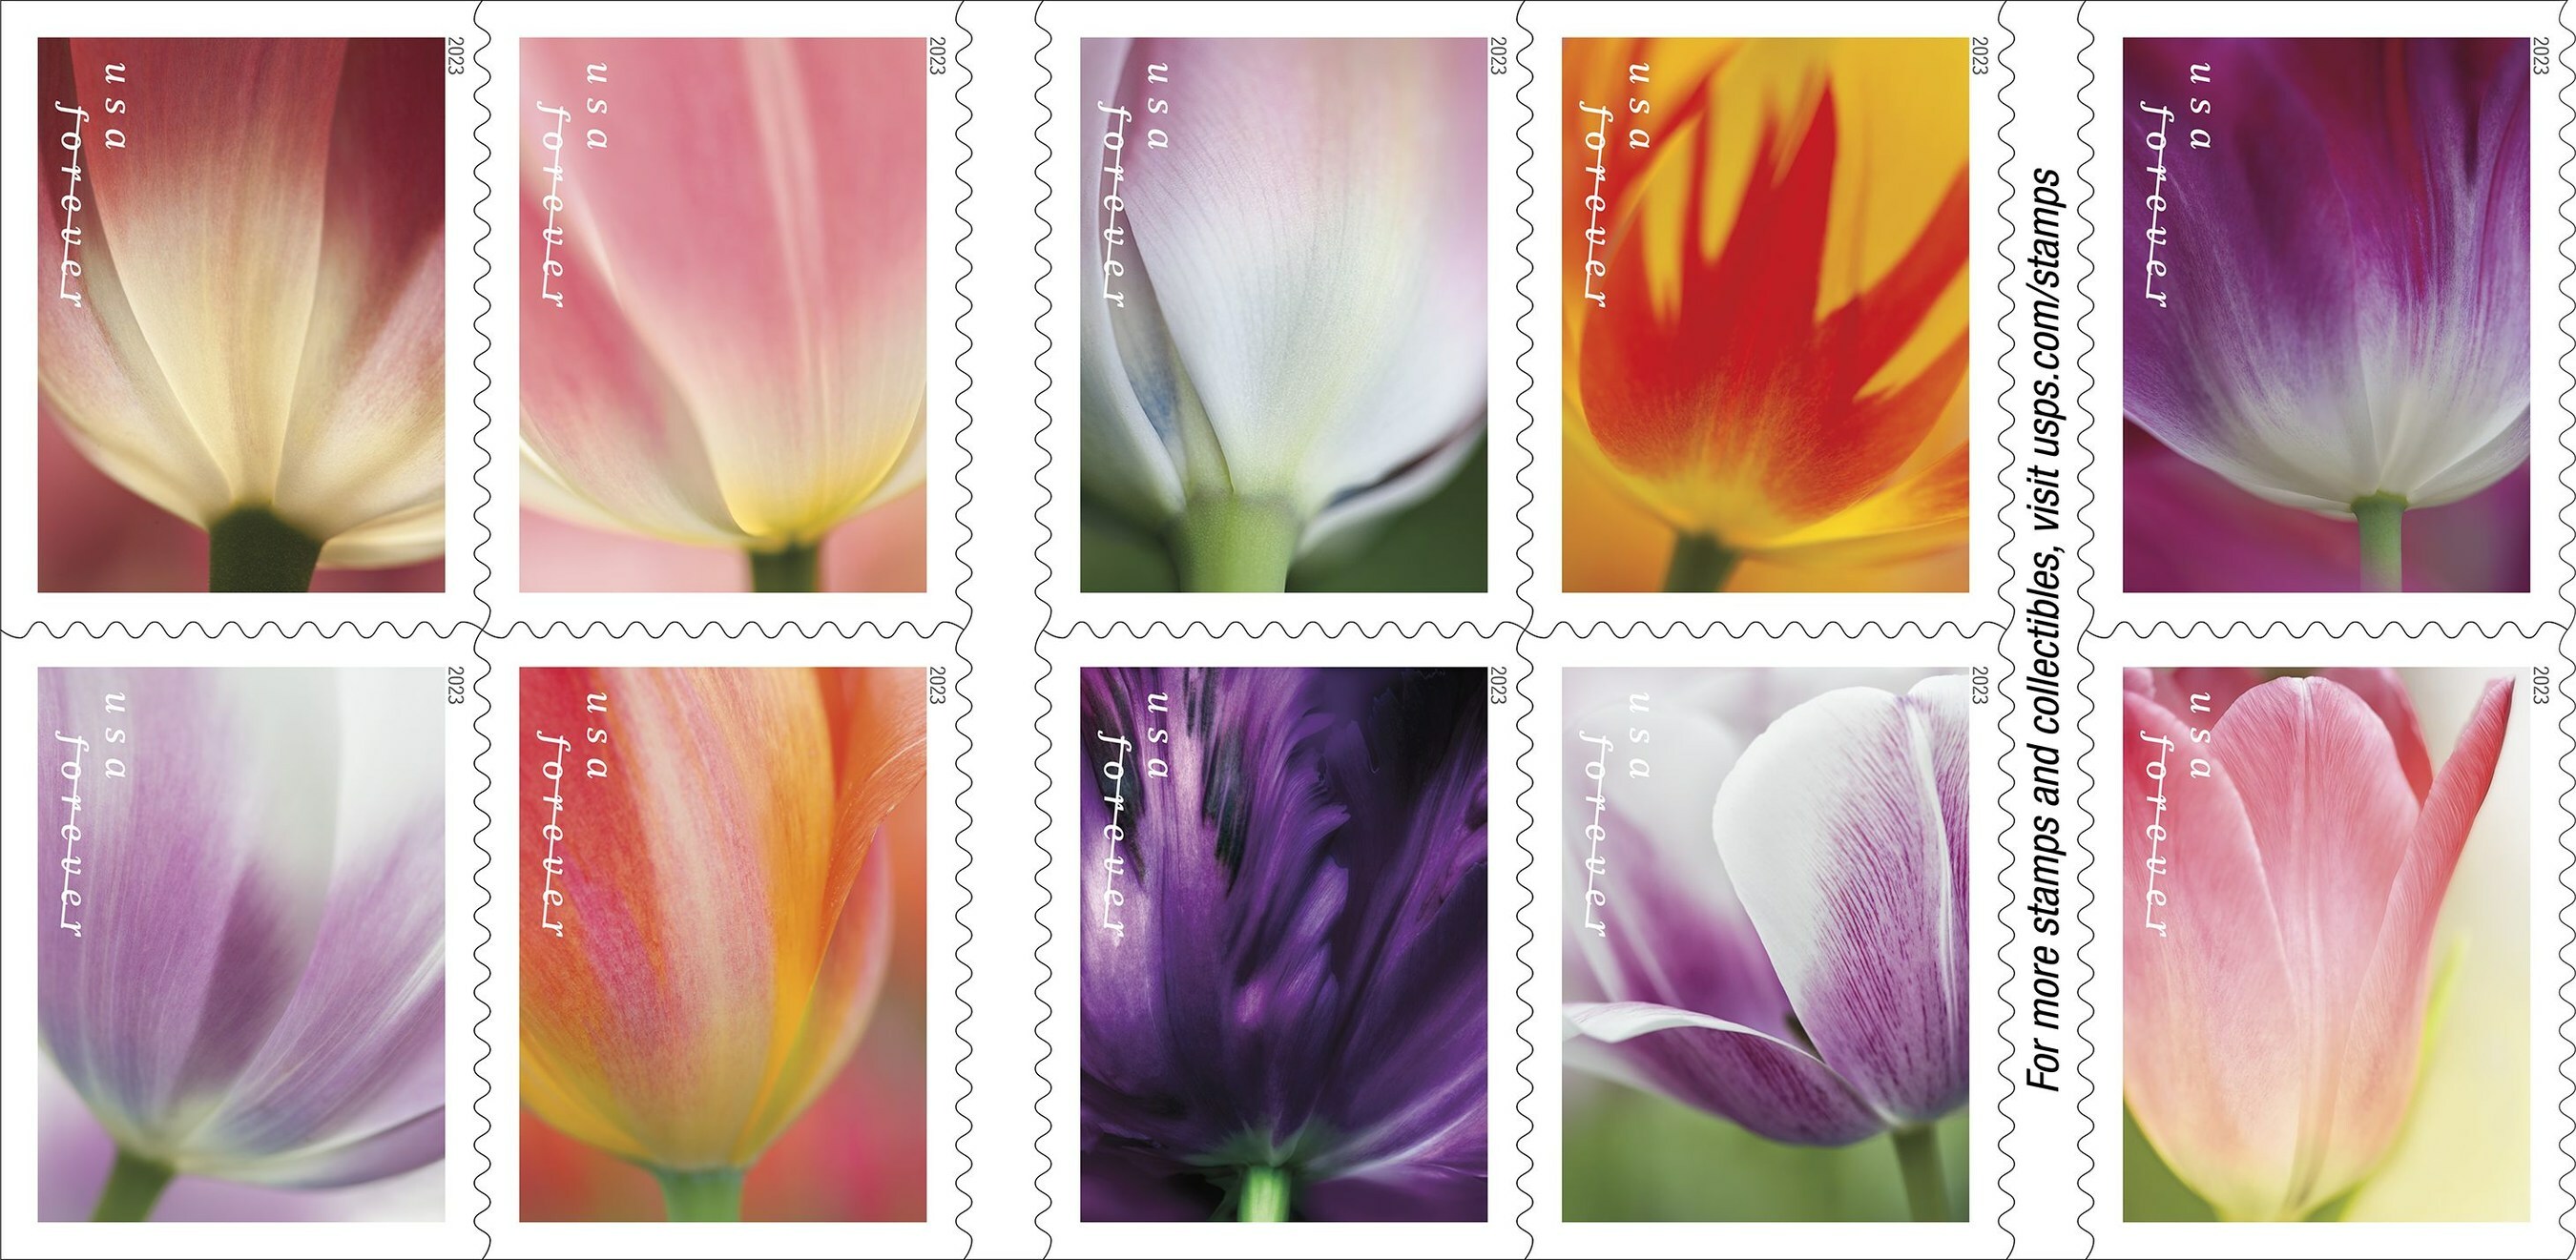 Romance blooms on new Love Forever stamps - Newsroom 